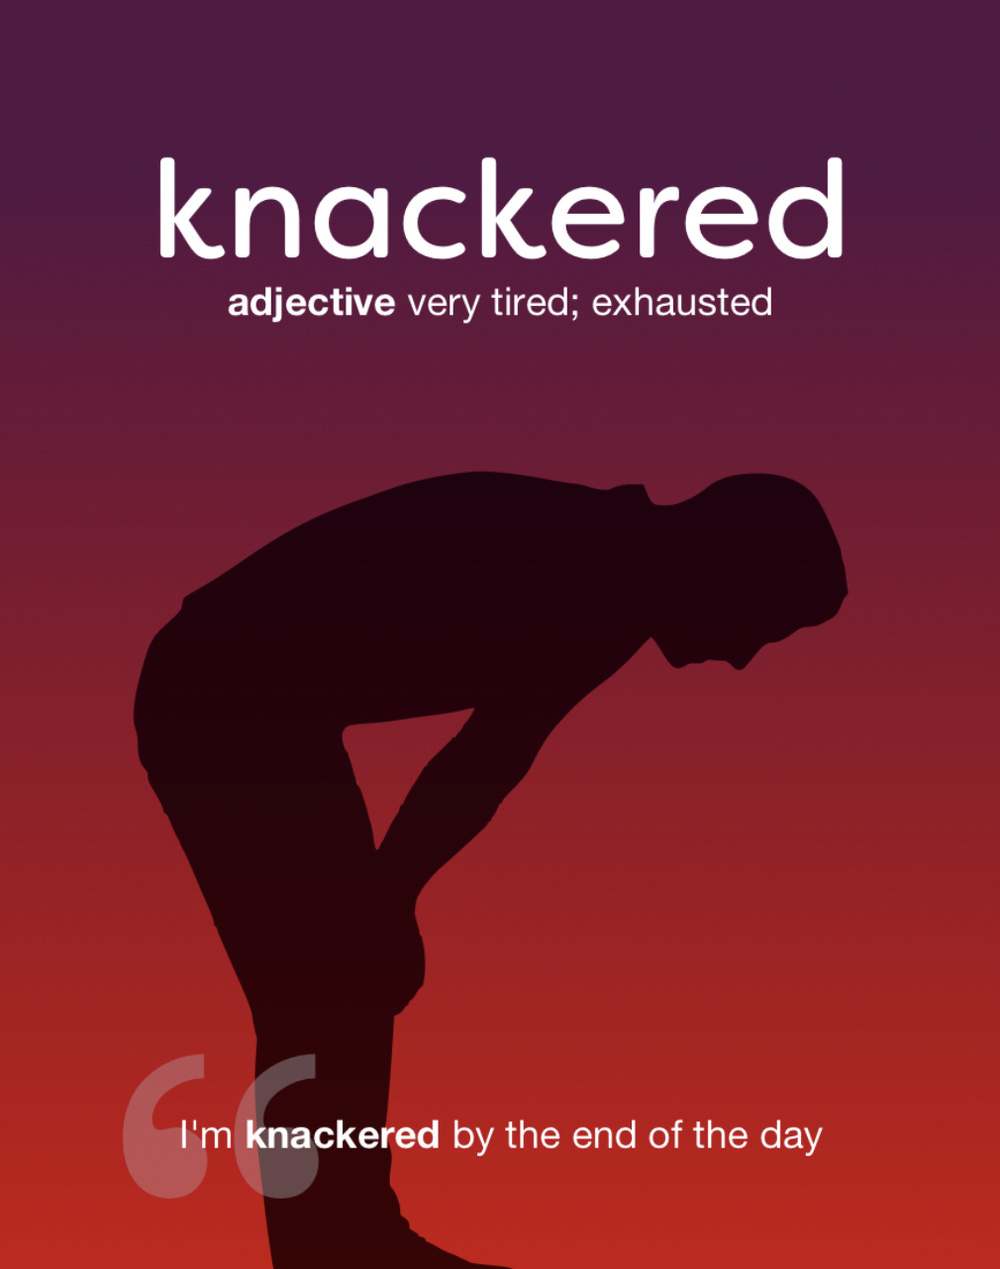 A definition image from the Lookup app for the word “knackered”, meaning very tired or exhausted. There’s a silhouette of a person hunched over in fatigue, and it should be my face instead.